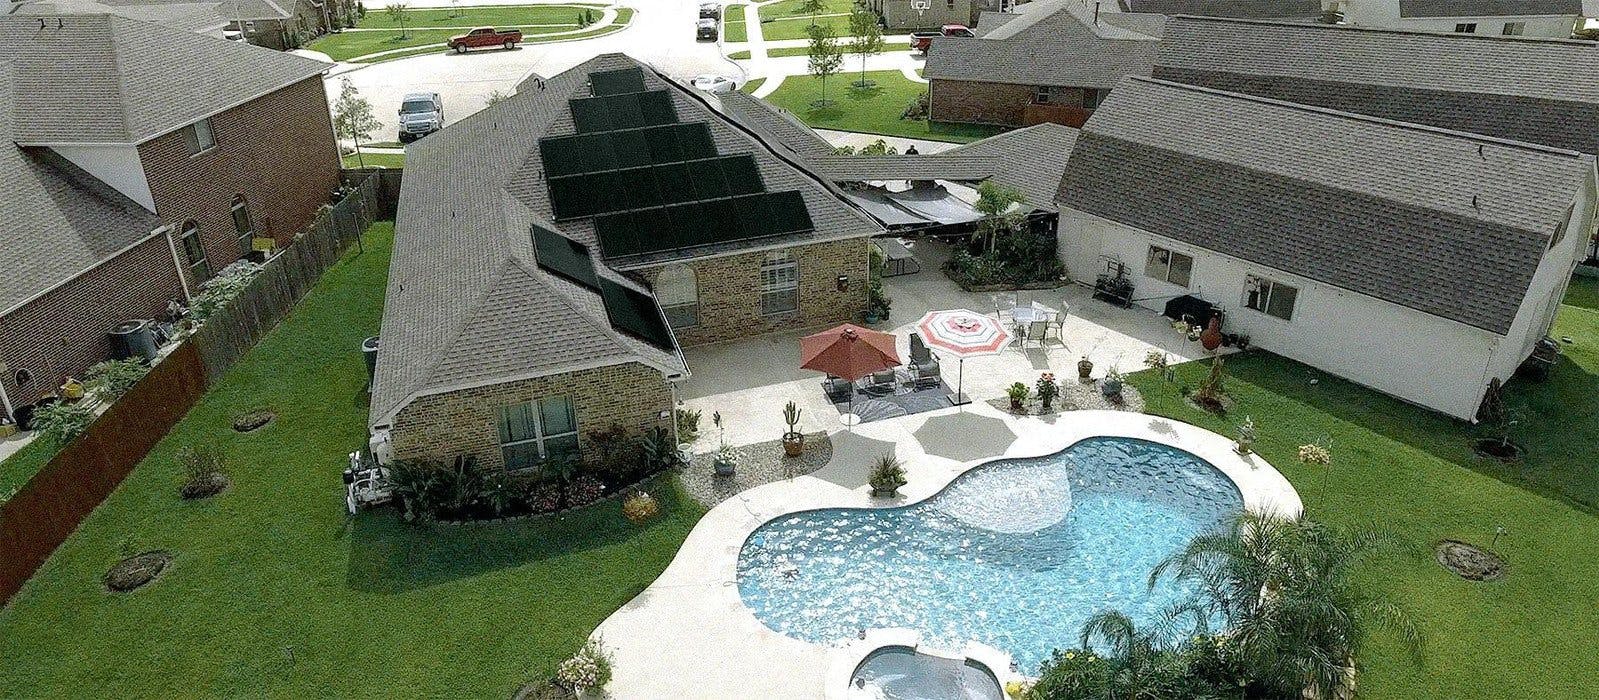 Home with solar panels and pool